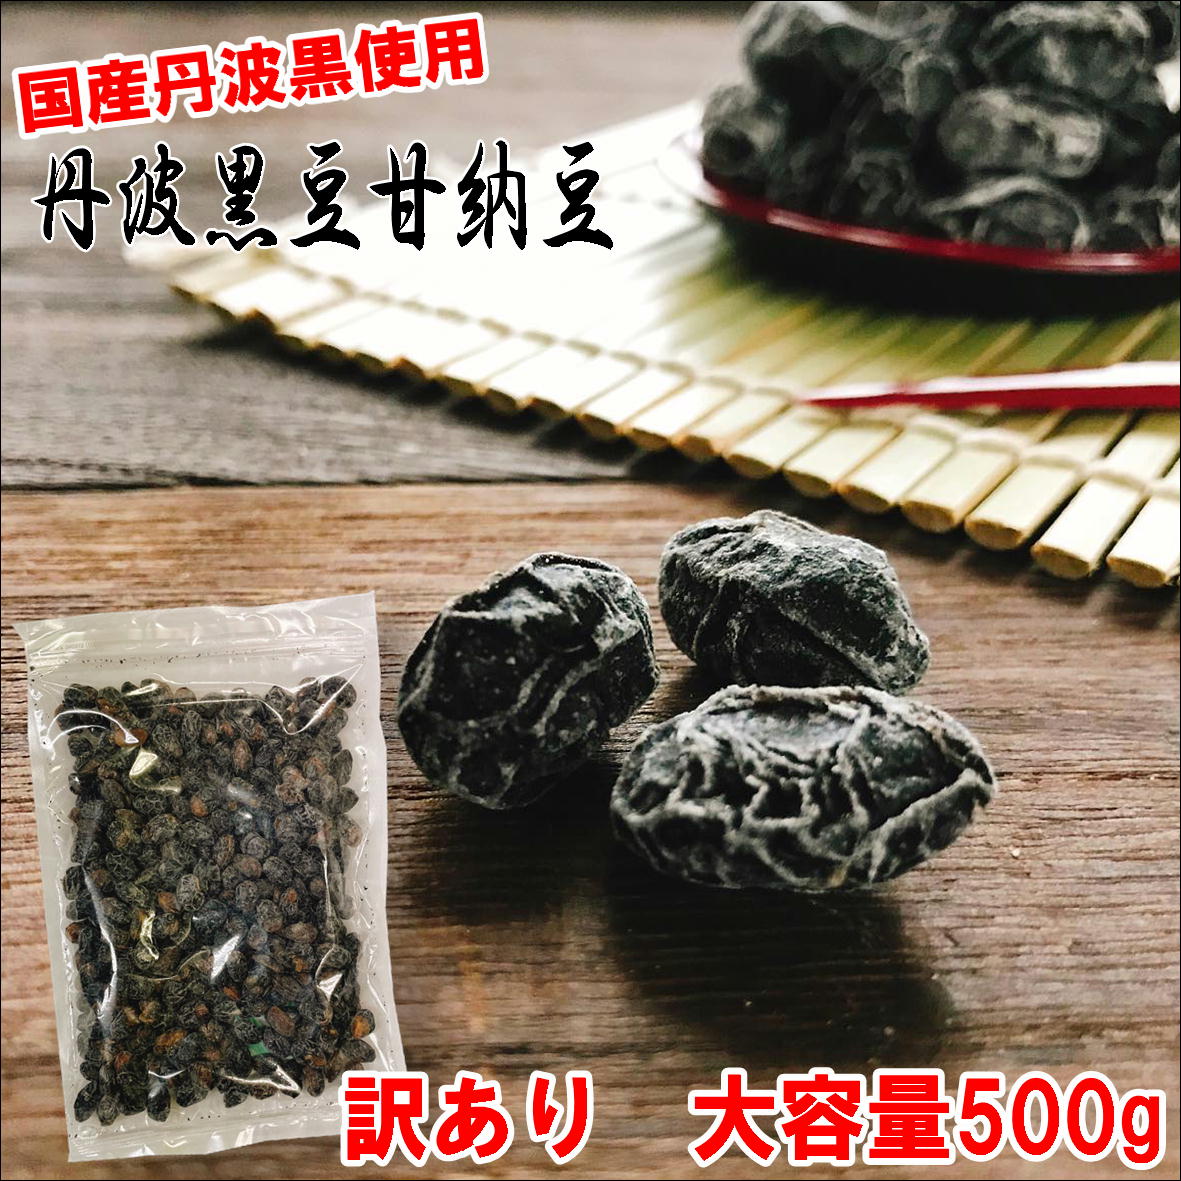  Tanba black soybean sugared natto 500g with translation economical 2024 year 3 month 11 day on and after. shipping mail service free shipping domestic production Tanba black ... legume black soybean black soybean natto Tanba black black large 